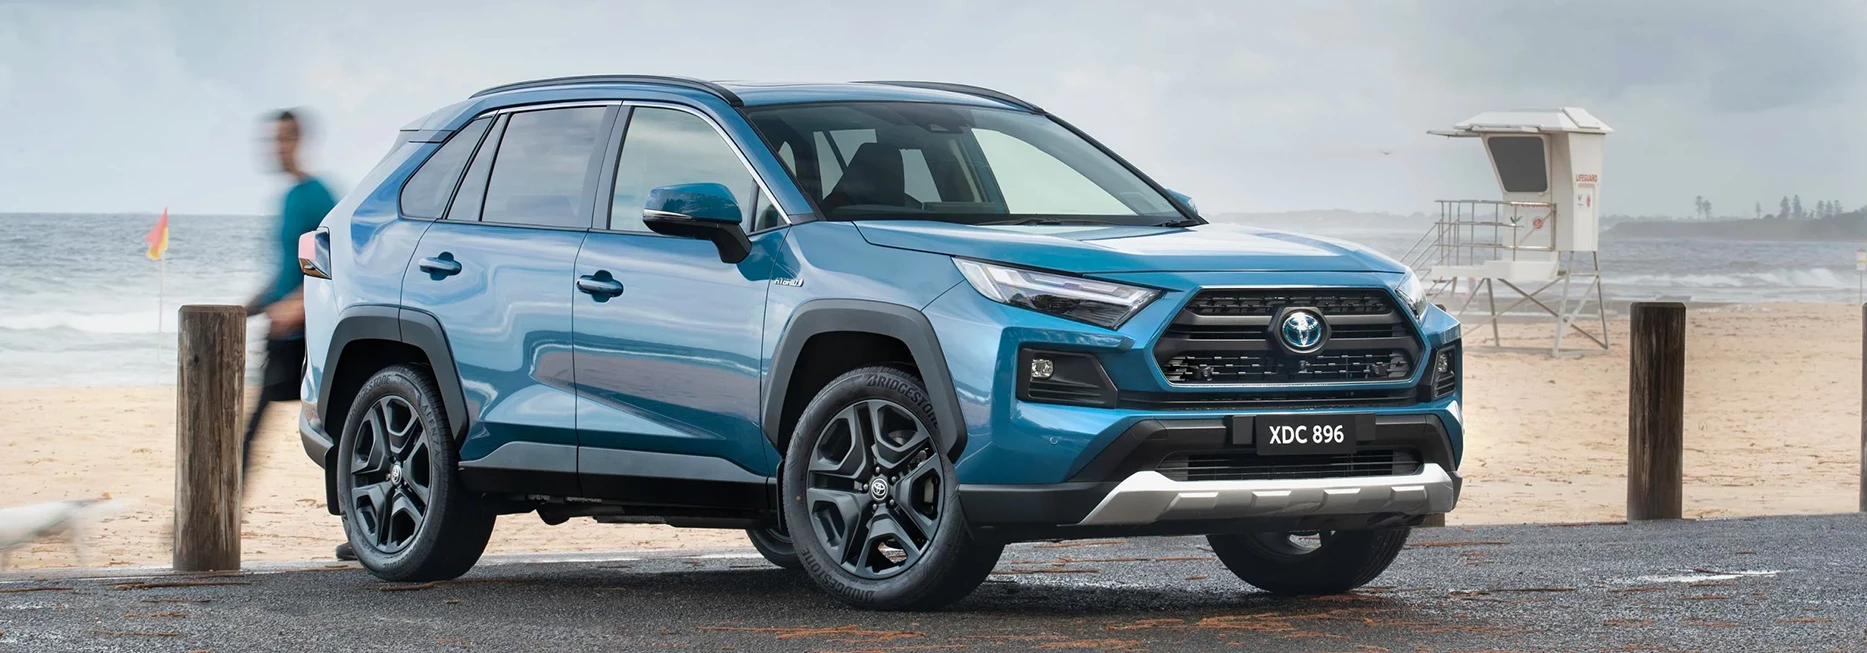 News Landing Image The American auto portal named Toyota RAV 4 as the most demanded SUV in the USA